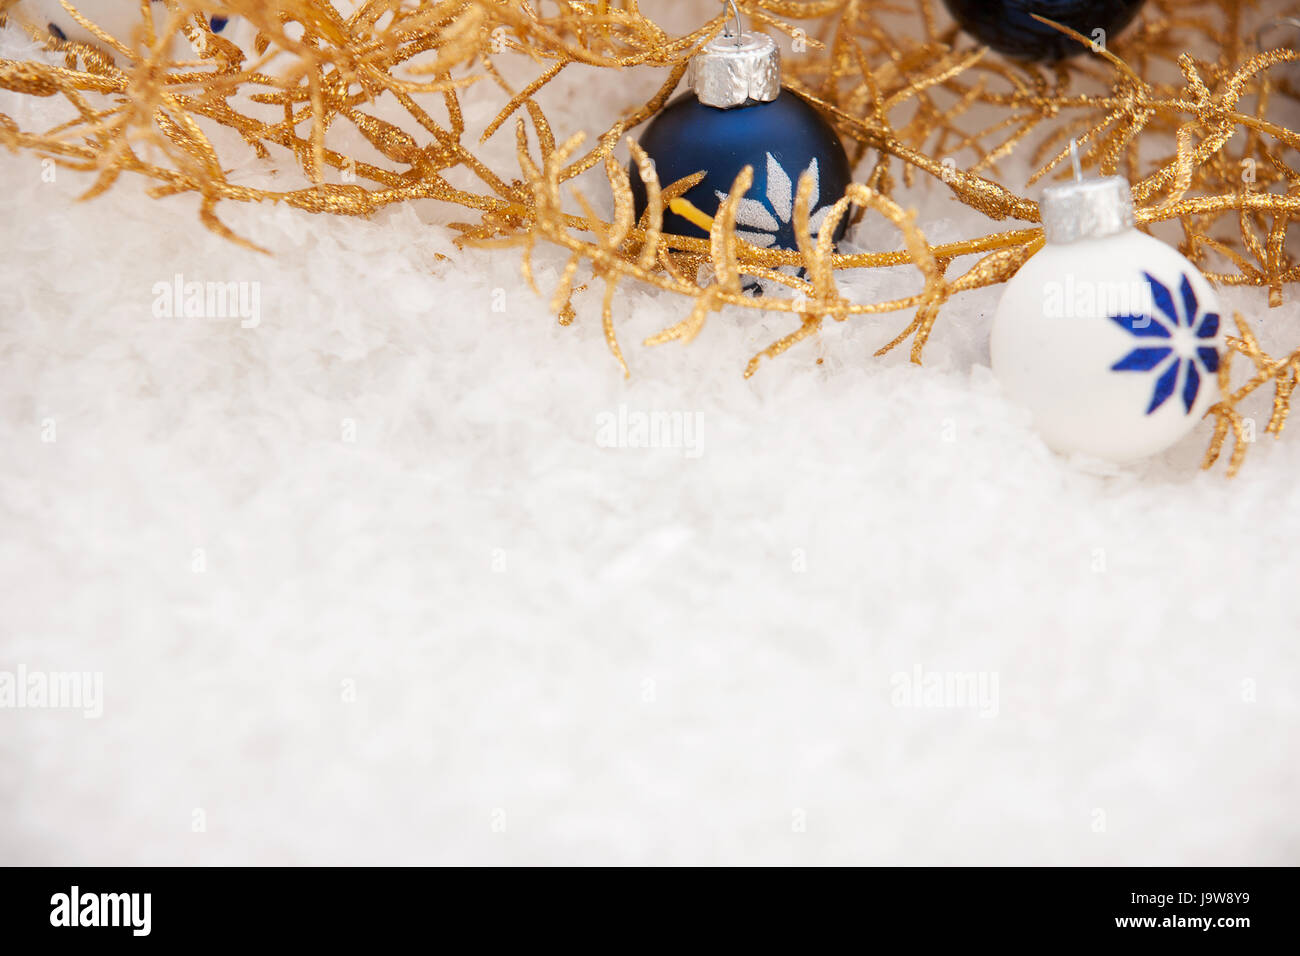 nuts, festive, biscuit, snow, christmas, xmas, x-mas, gingerbread, blue, indoor Stock Photo